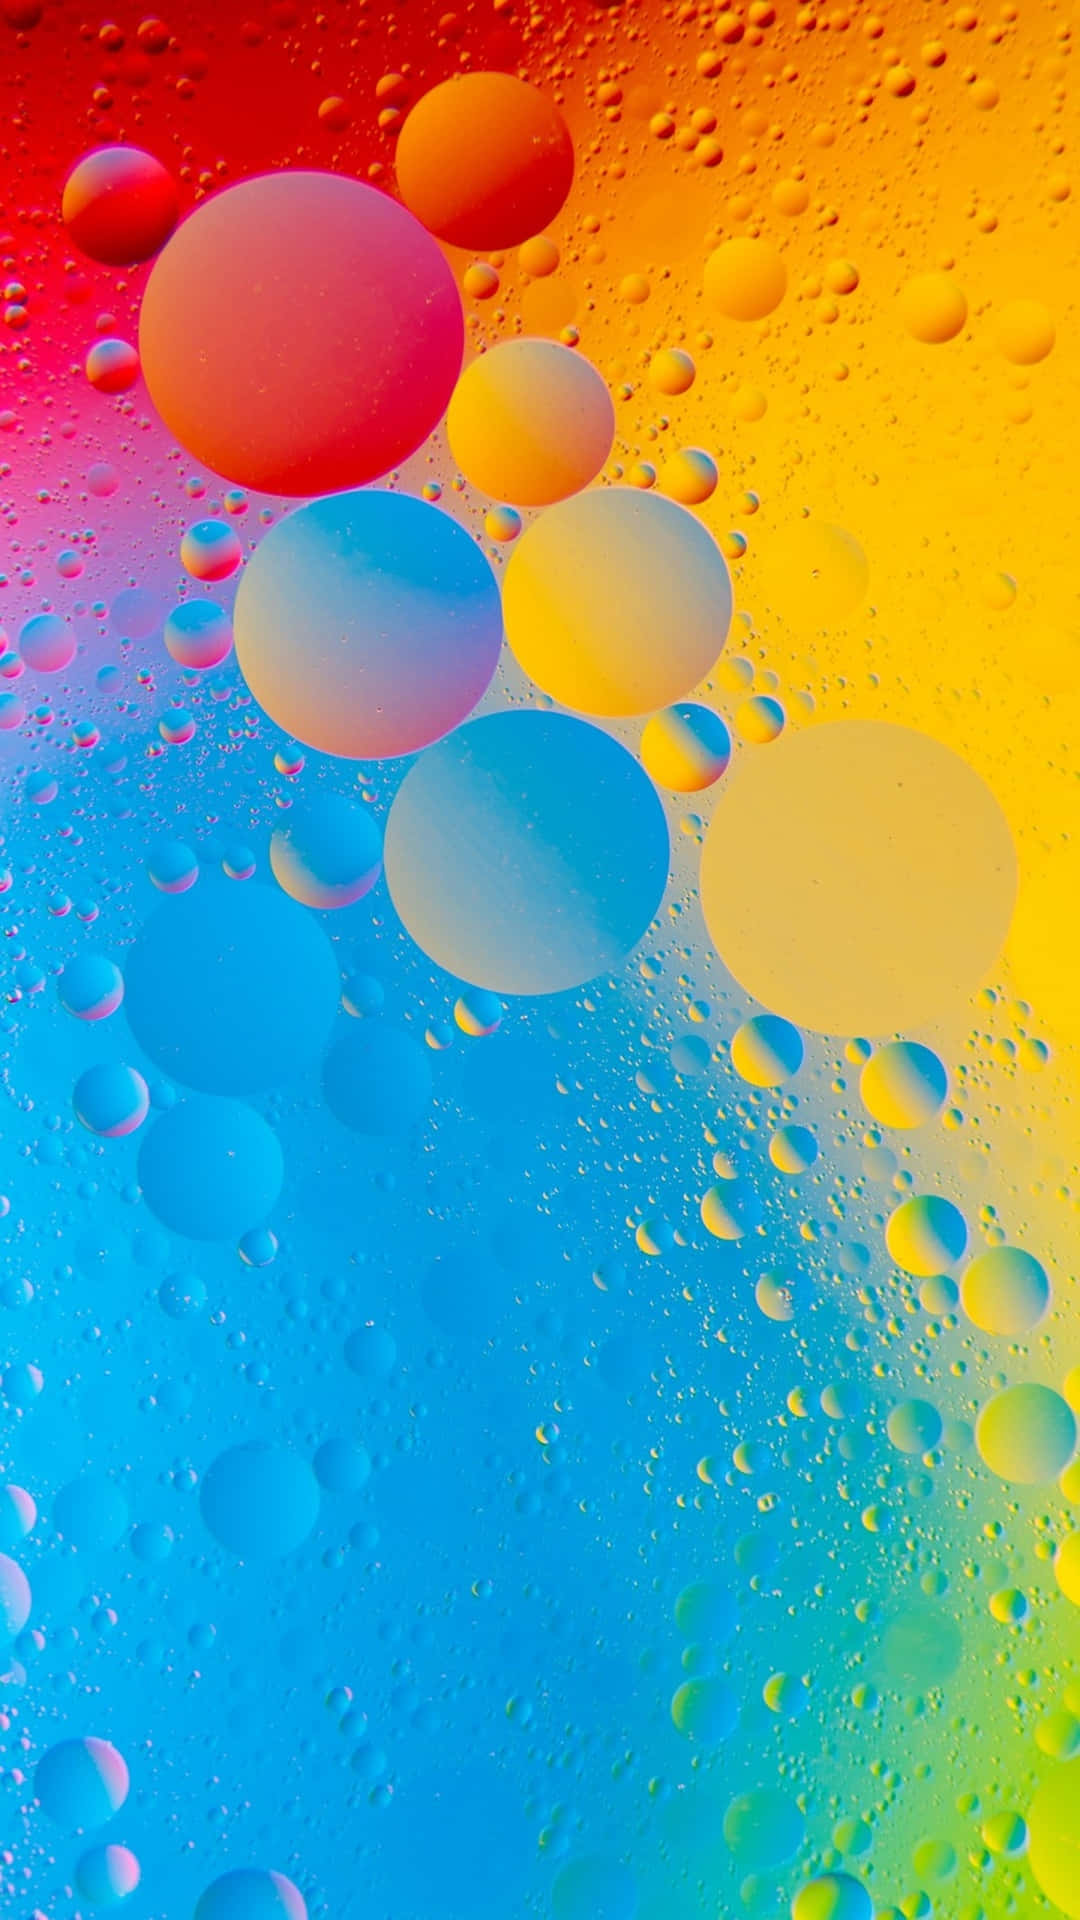 Magnificent View Of Colorful 4k Water Droplet Abstract Art For Phone Background